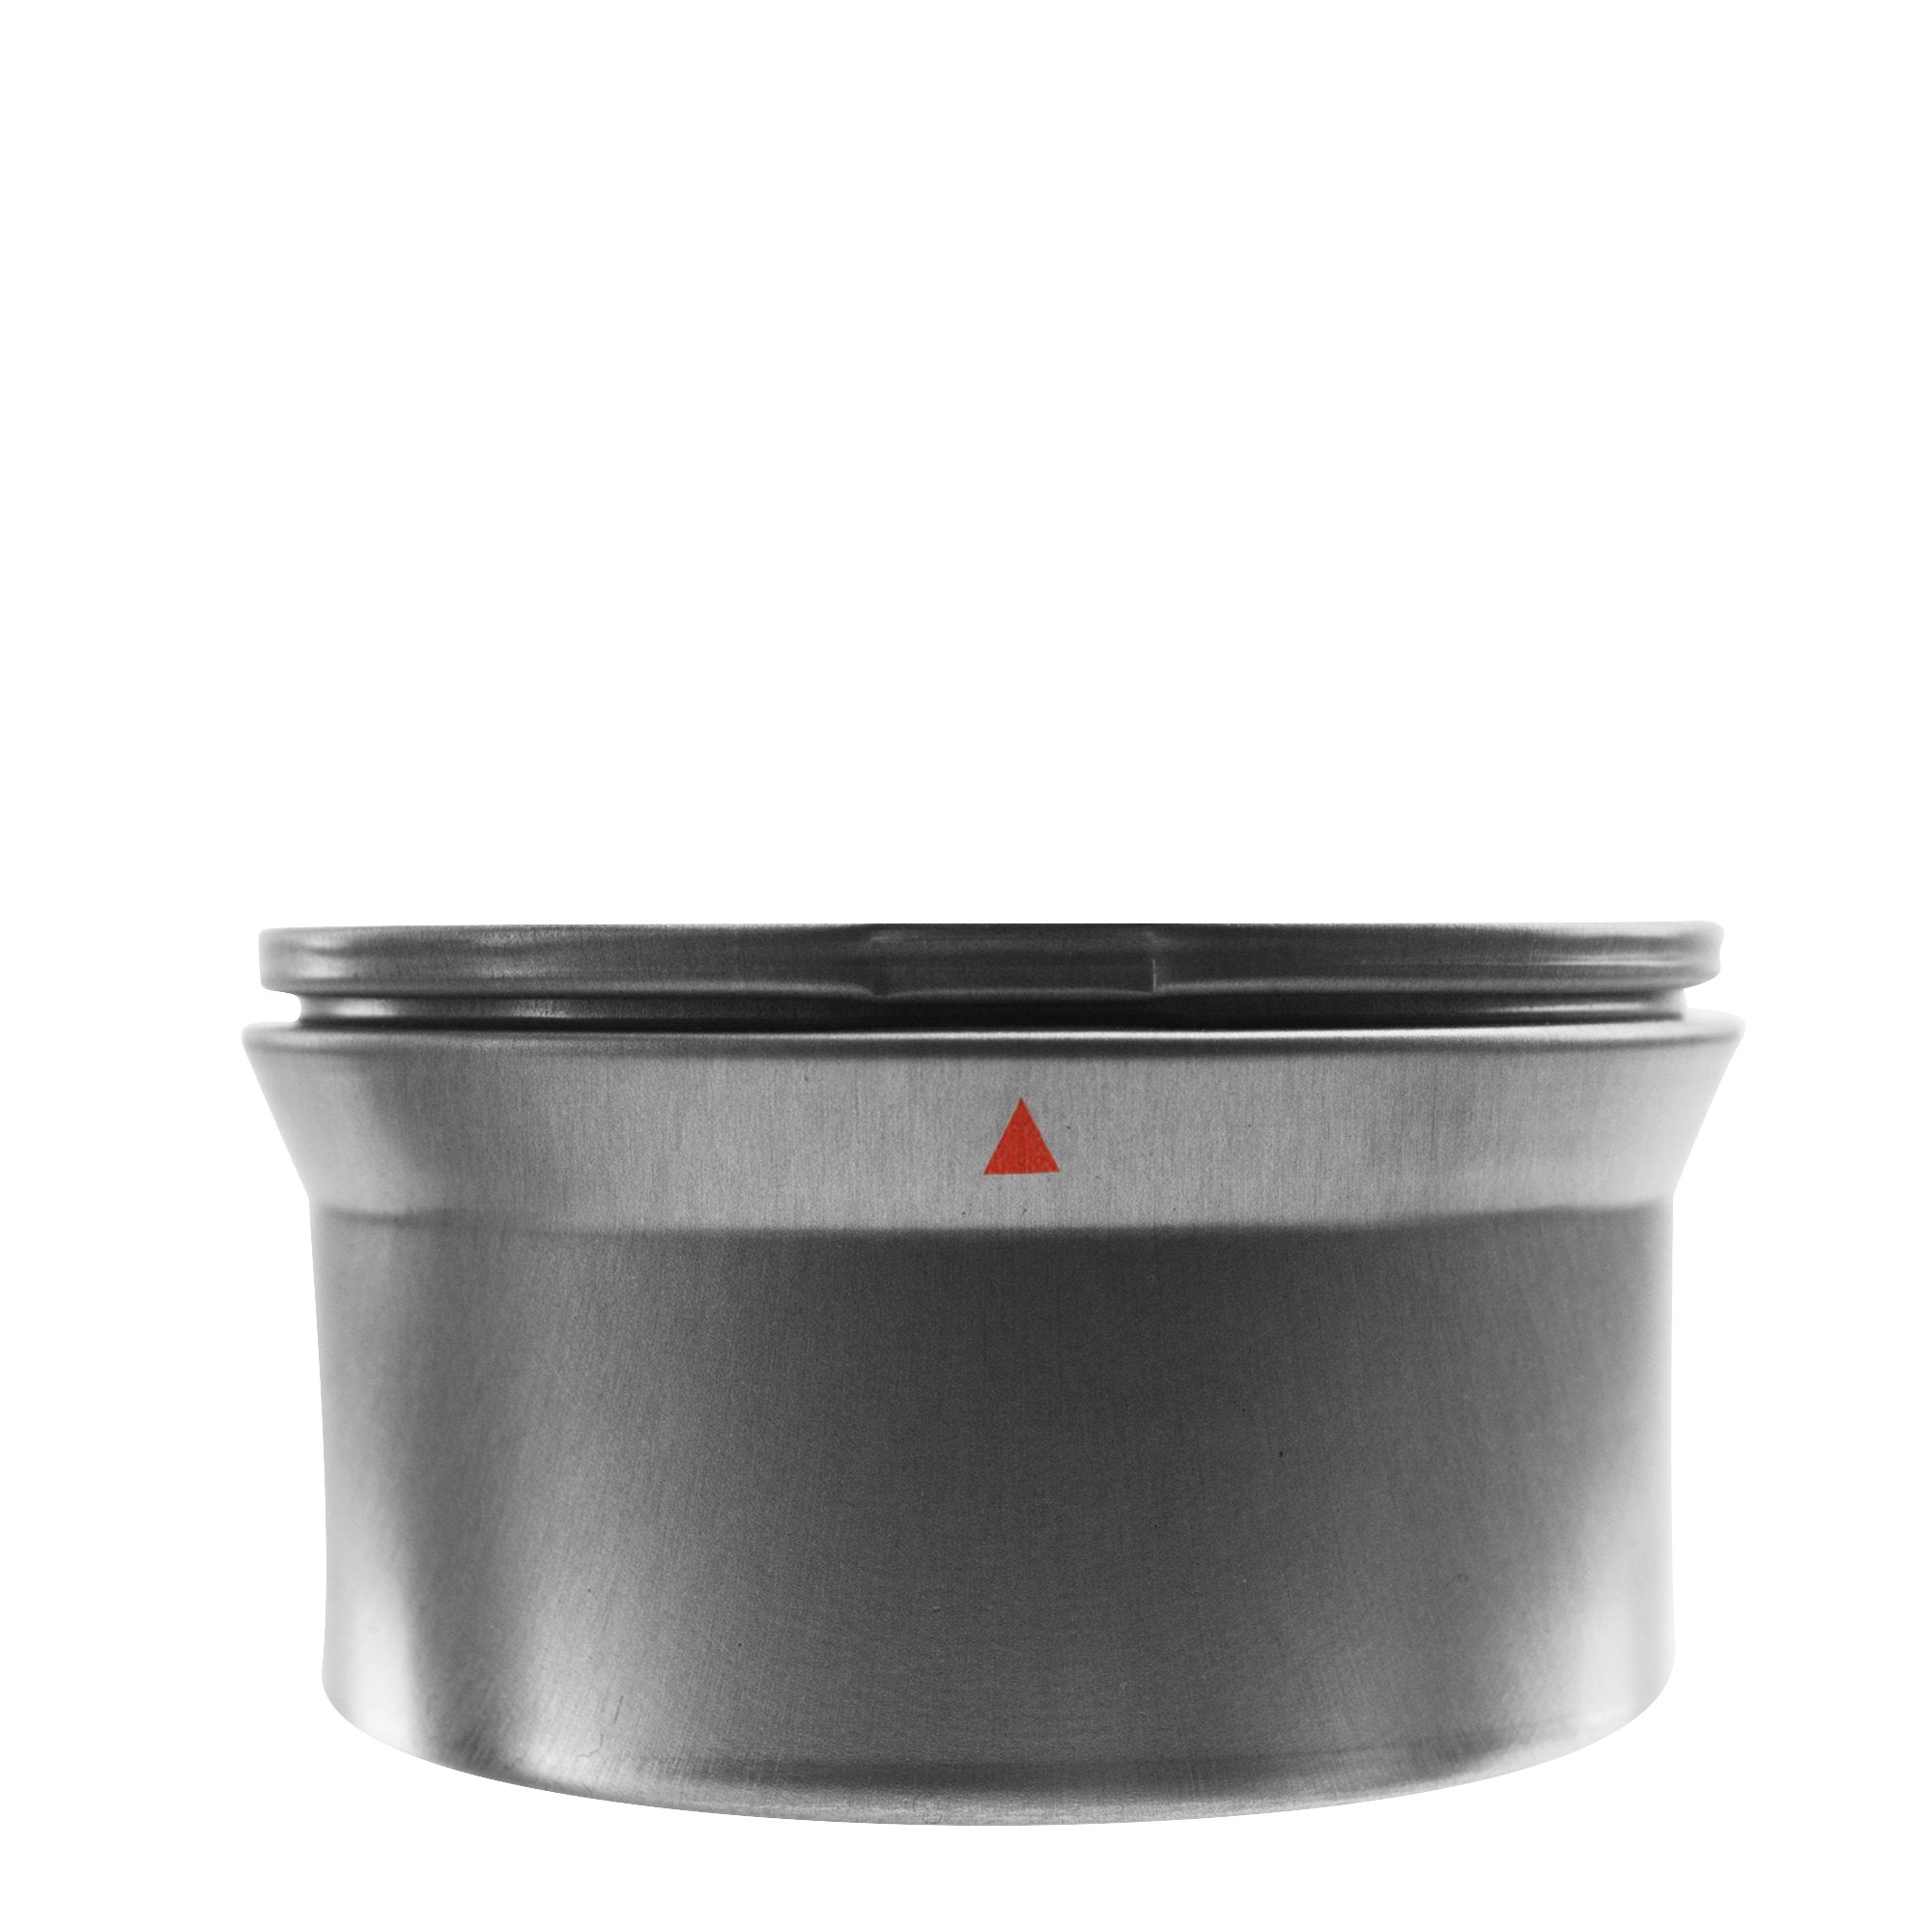 Sample Child Resistant | Safely Lock Sentinel Tin with Cap | Small and Medium - Brushed Metal - 7